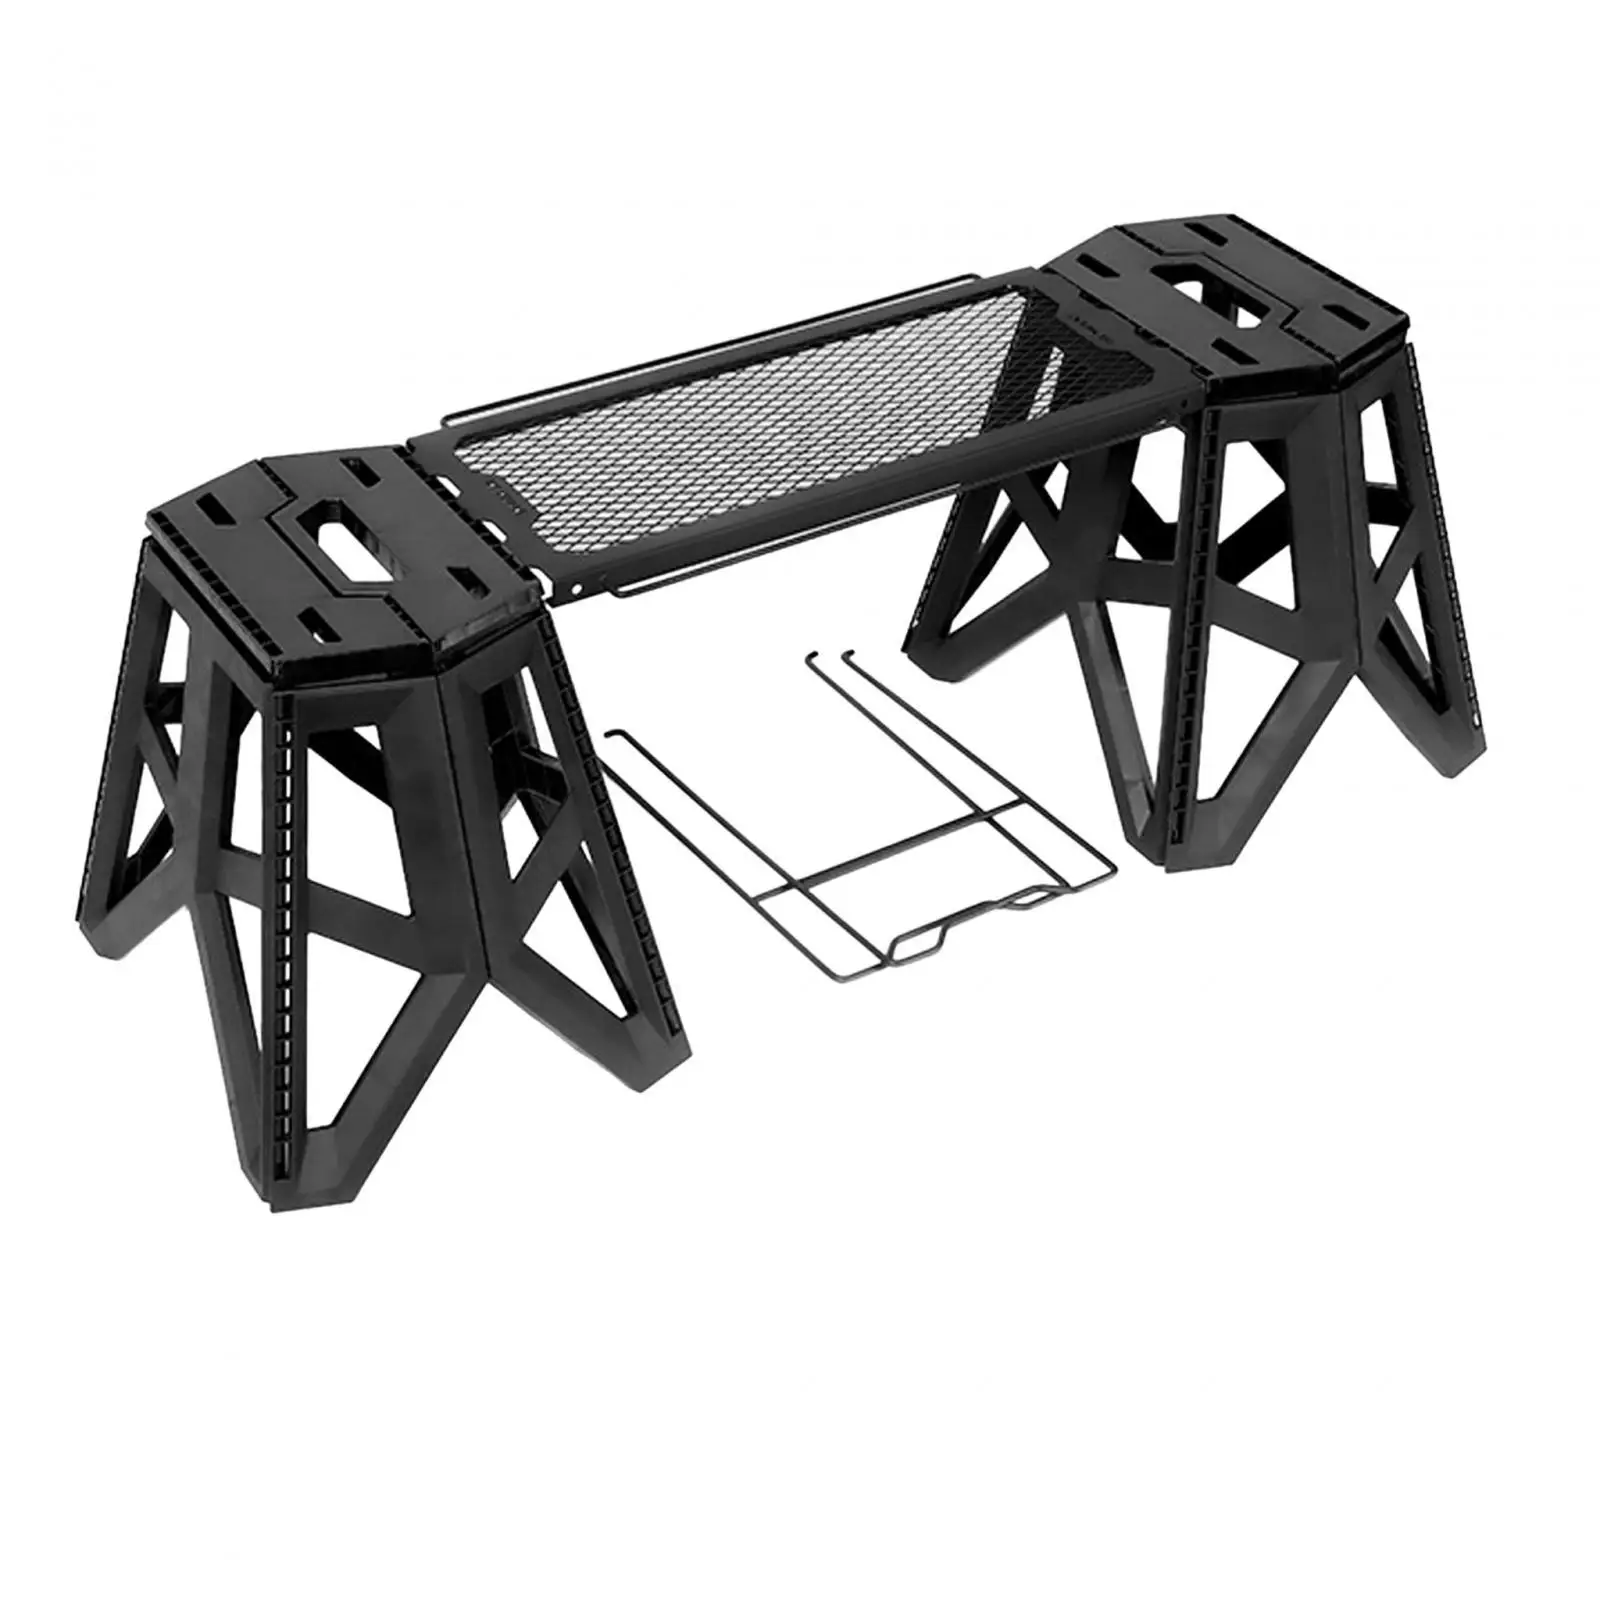 Camping Table and Stool Set Camping Seat Lightweight Foldable Folding Stool